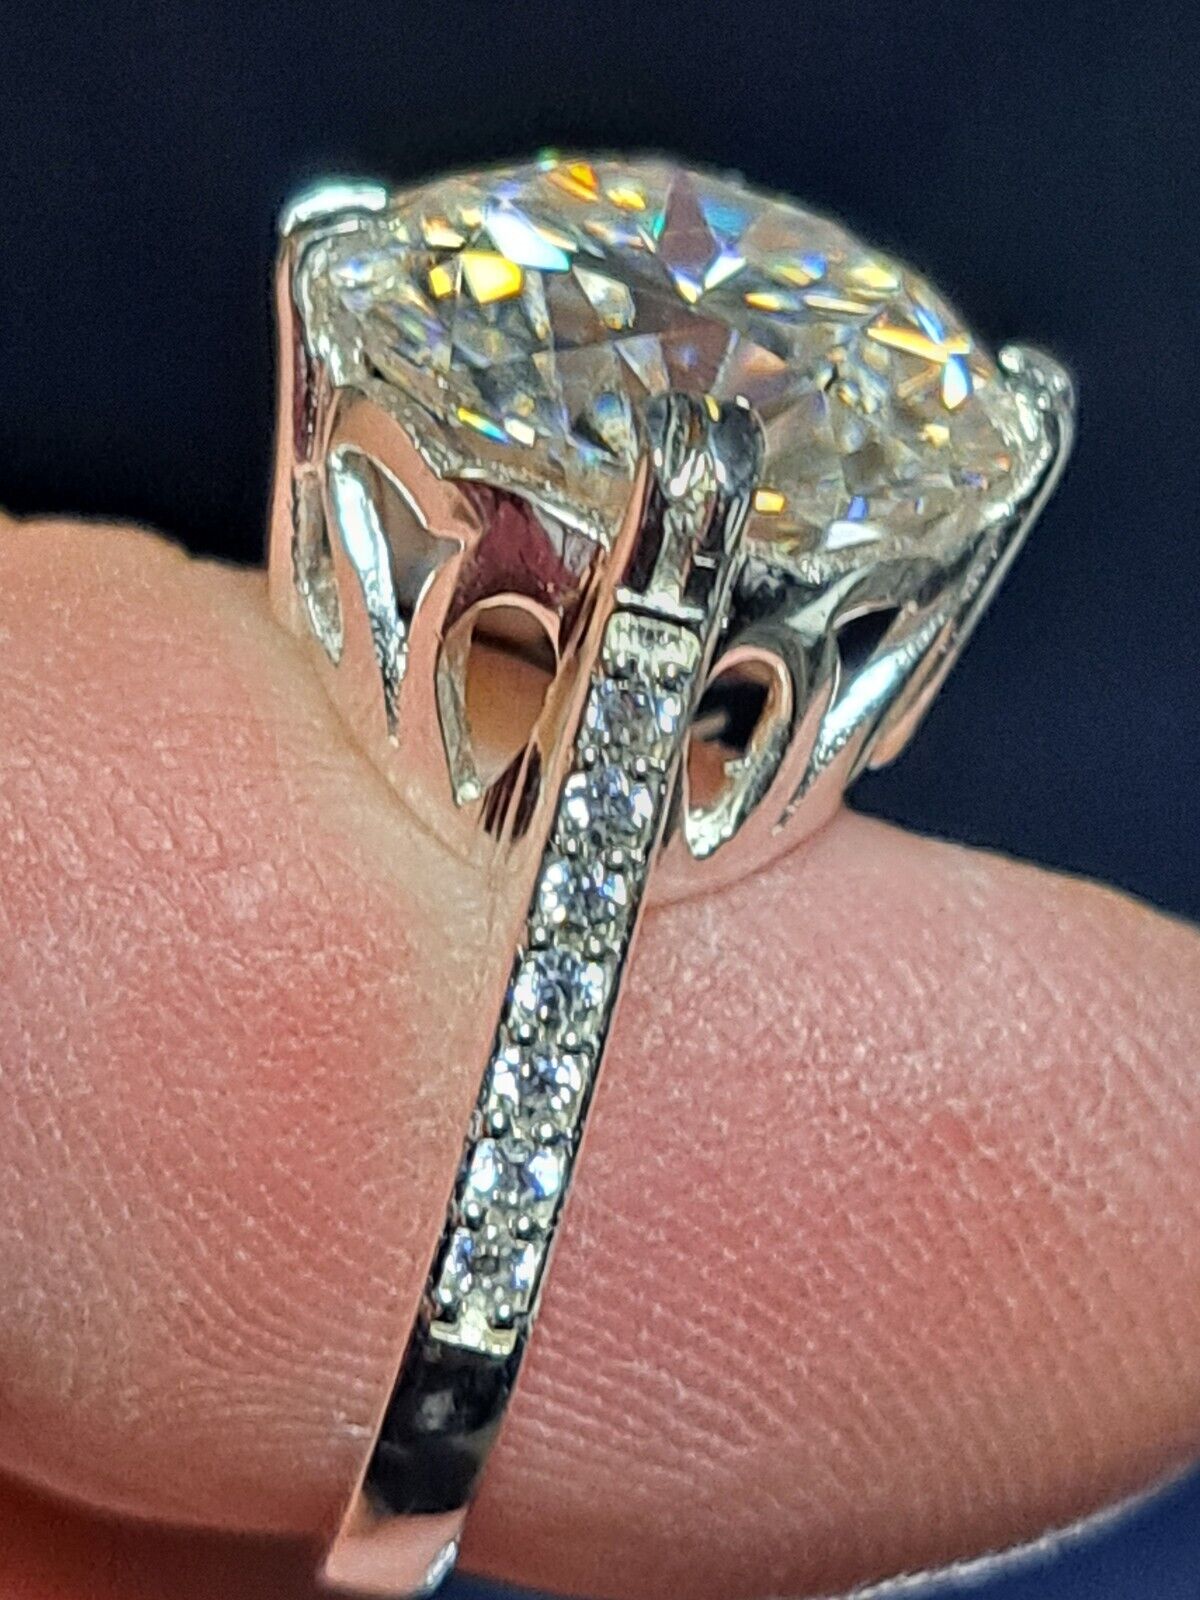 *CERTIFIED* STUNNING HUGE 7.40 Ct. WHITE HPHT DIAMOND RING WITH ACCENTS SIZE 7.5